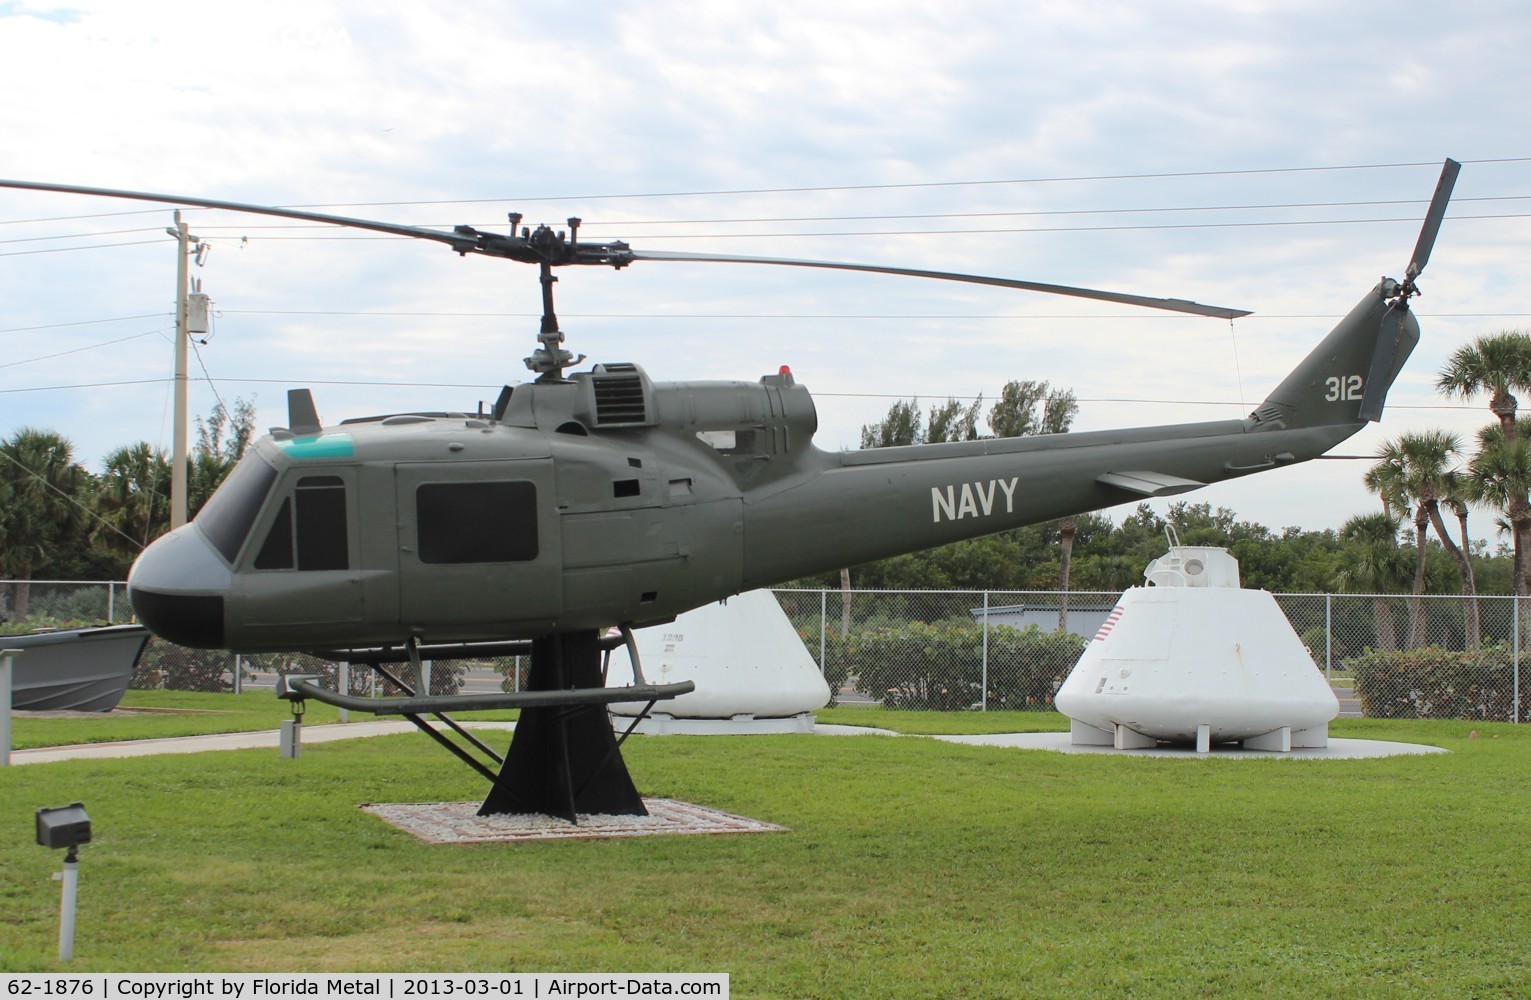 62-1876, 1962 Bell UH-1B Iroquois C/N 396, UH-1B at Navy Seal Museum Ft. Pierce